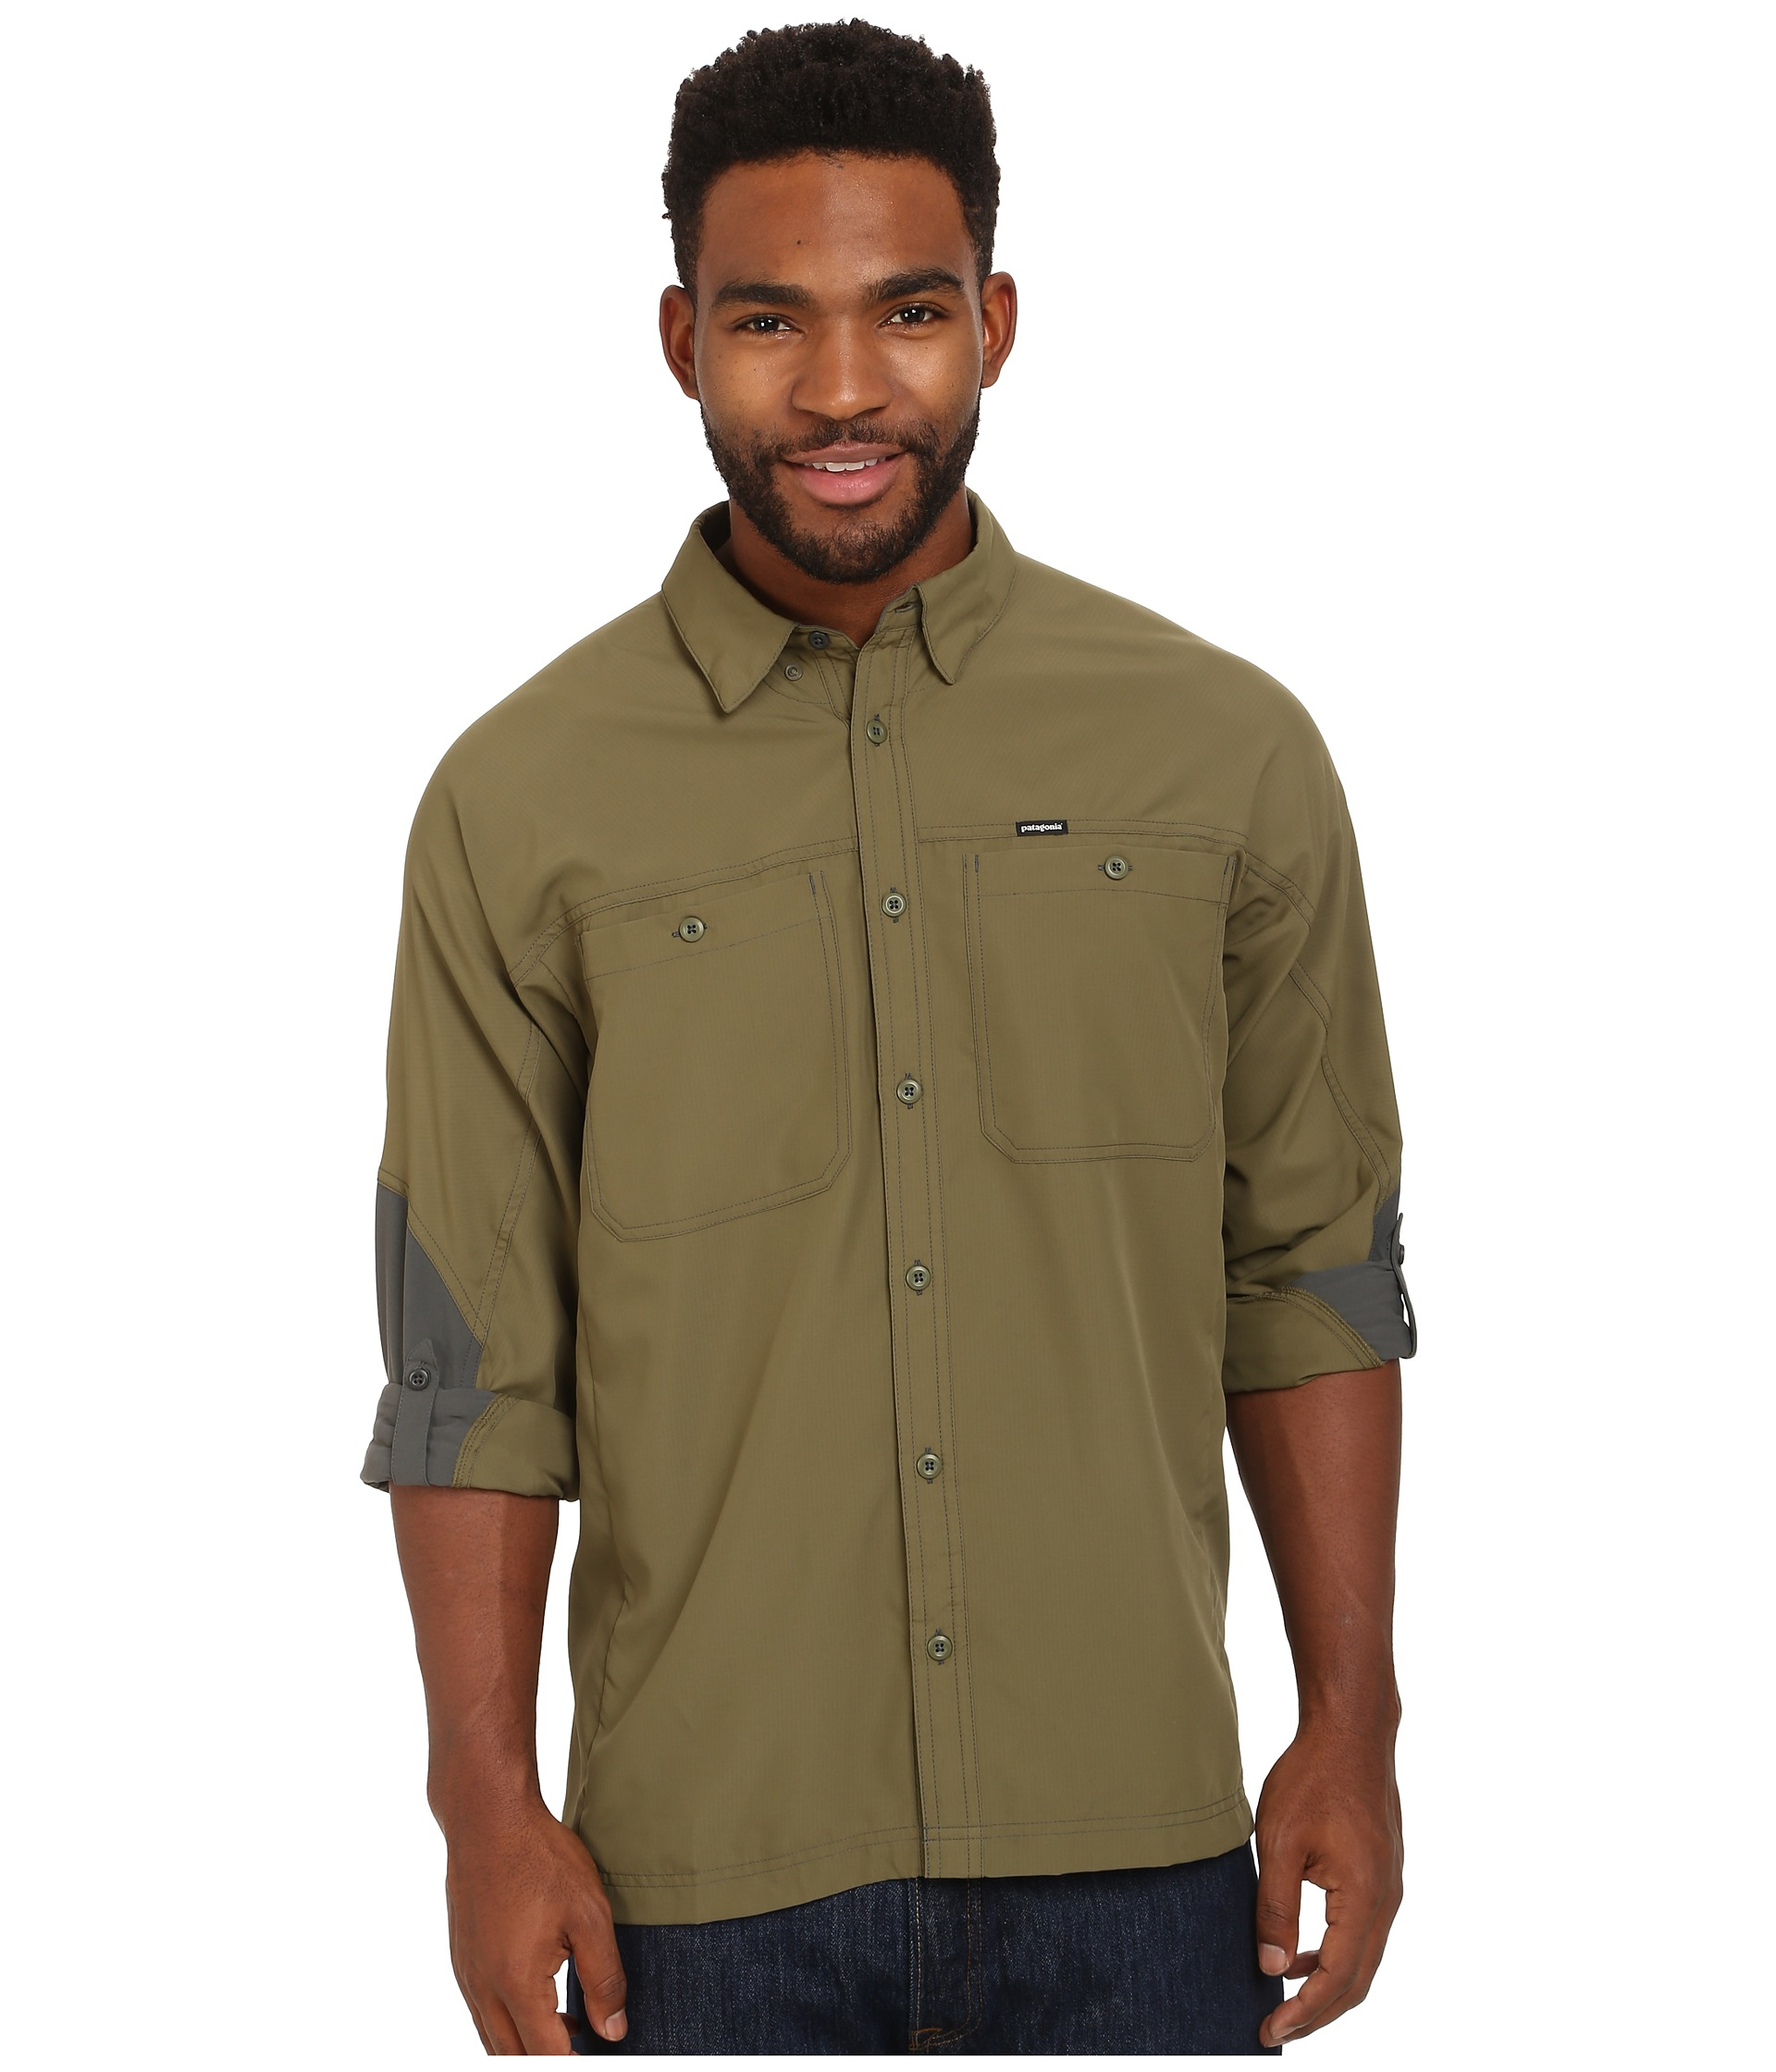 Lyst - Patagonia Lightweight Field Shirt in Natural for Men